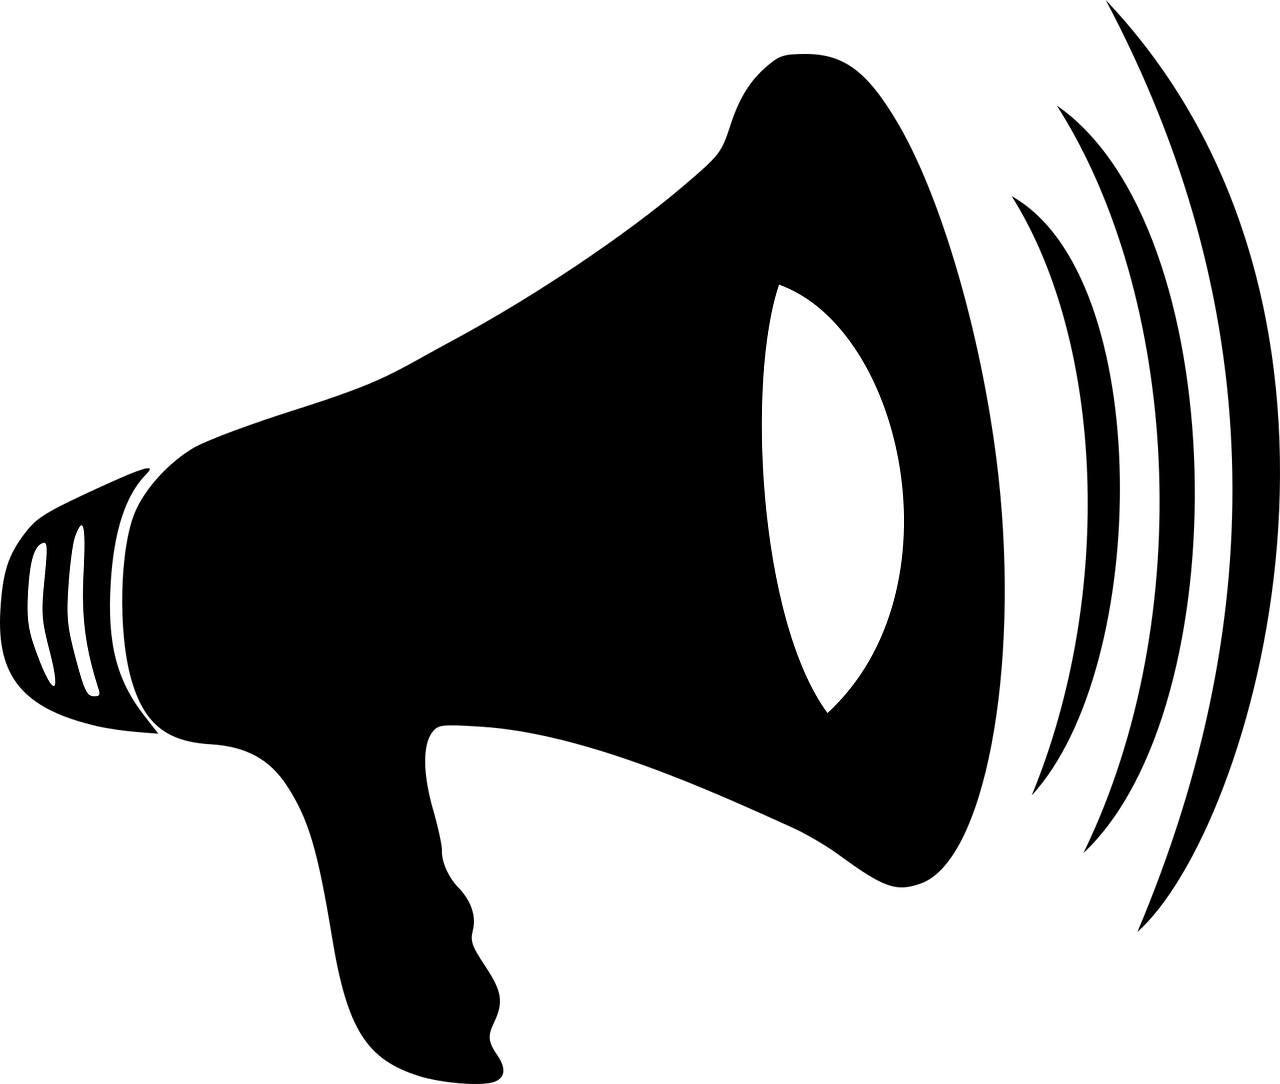 a black and white photo of a cat's eyes, an ambient occlusion render, inspired by Edward Weston, light and space, 3 moons, black backround. inkscape, seen from a distance, minimalist svg